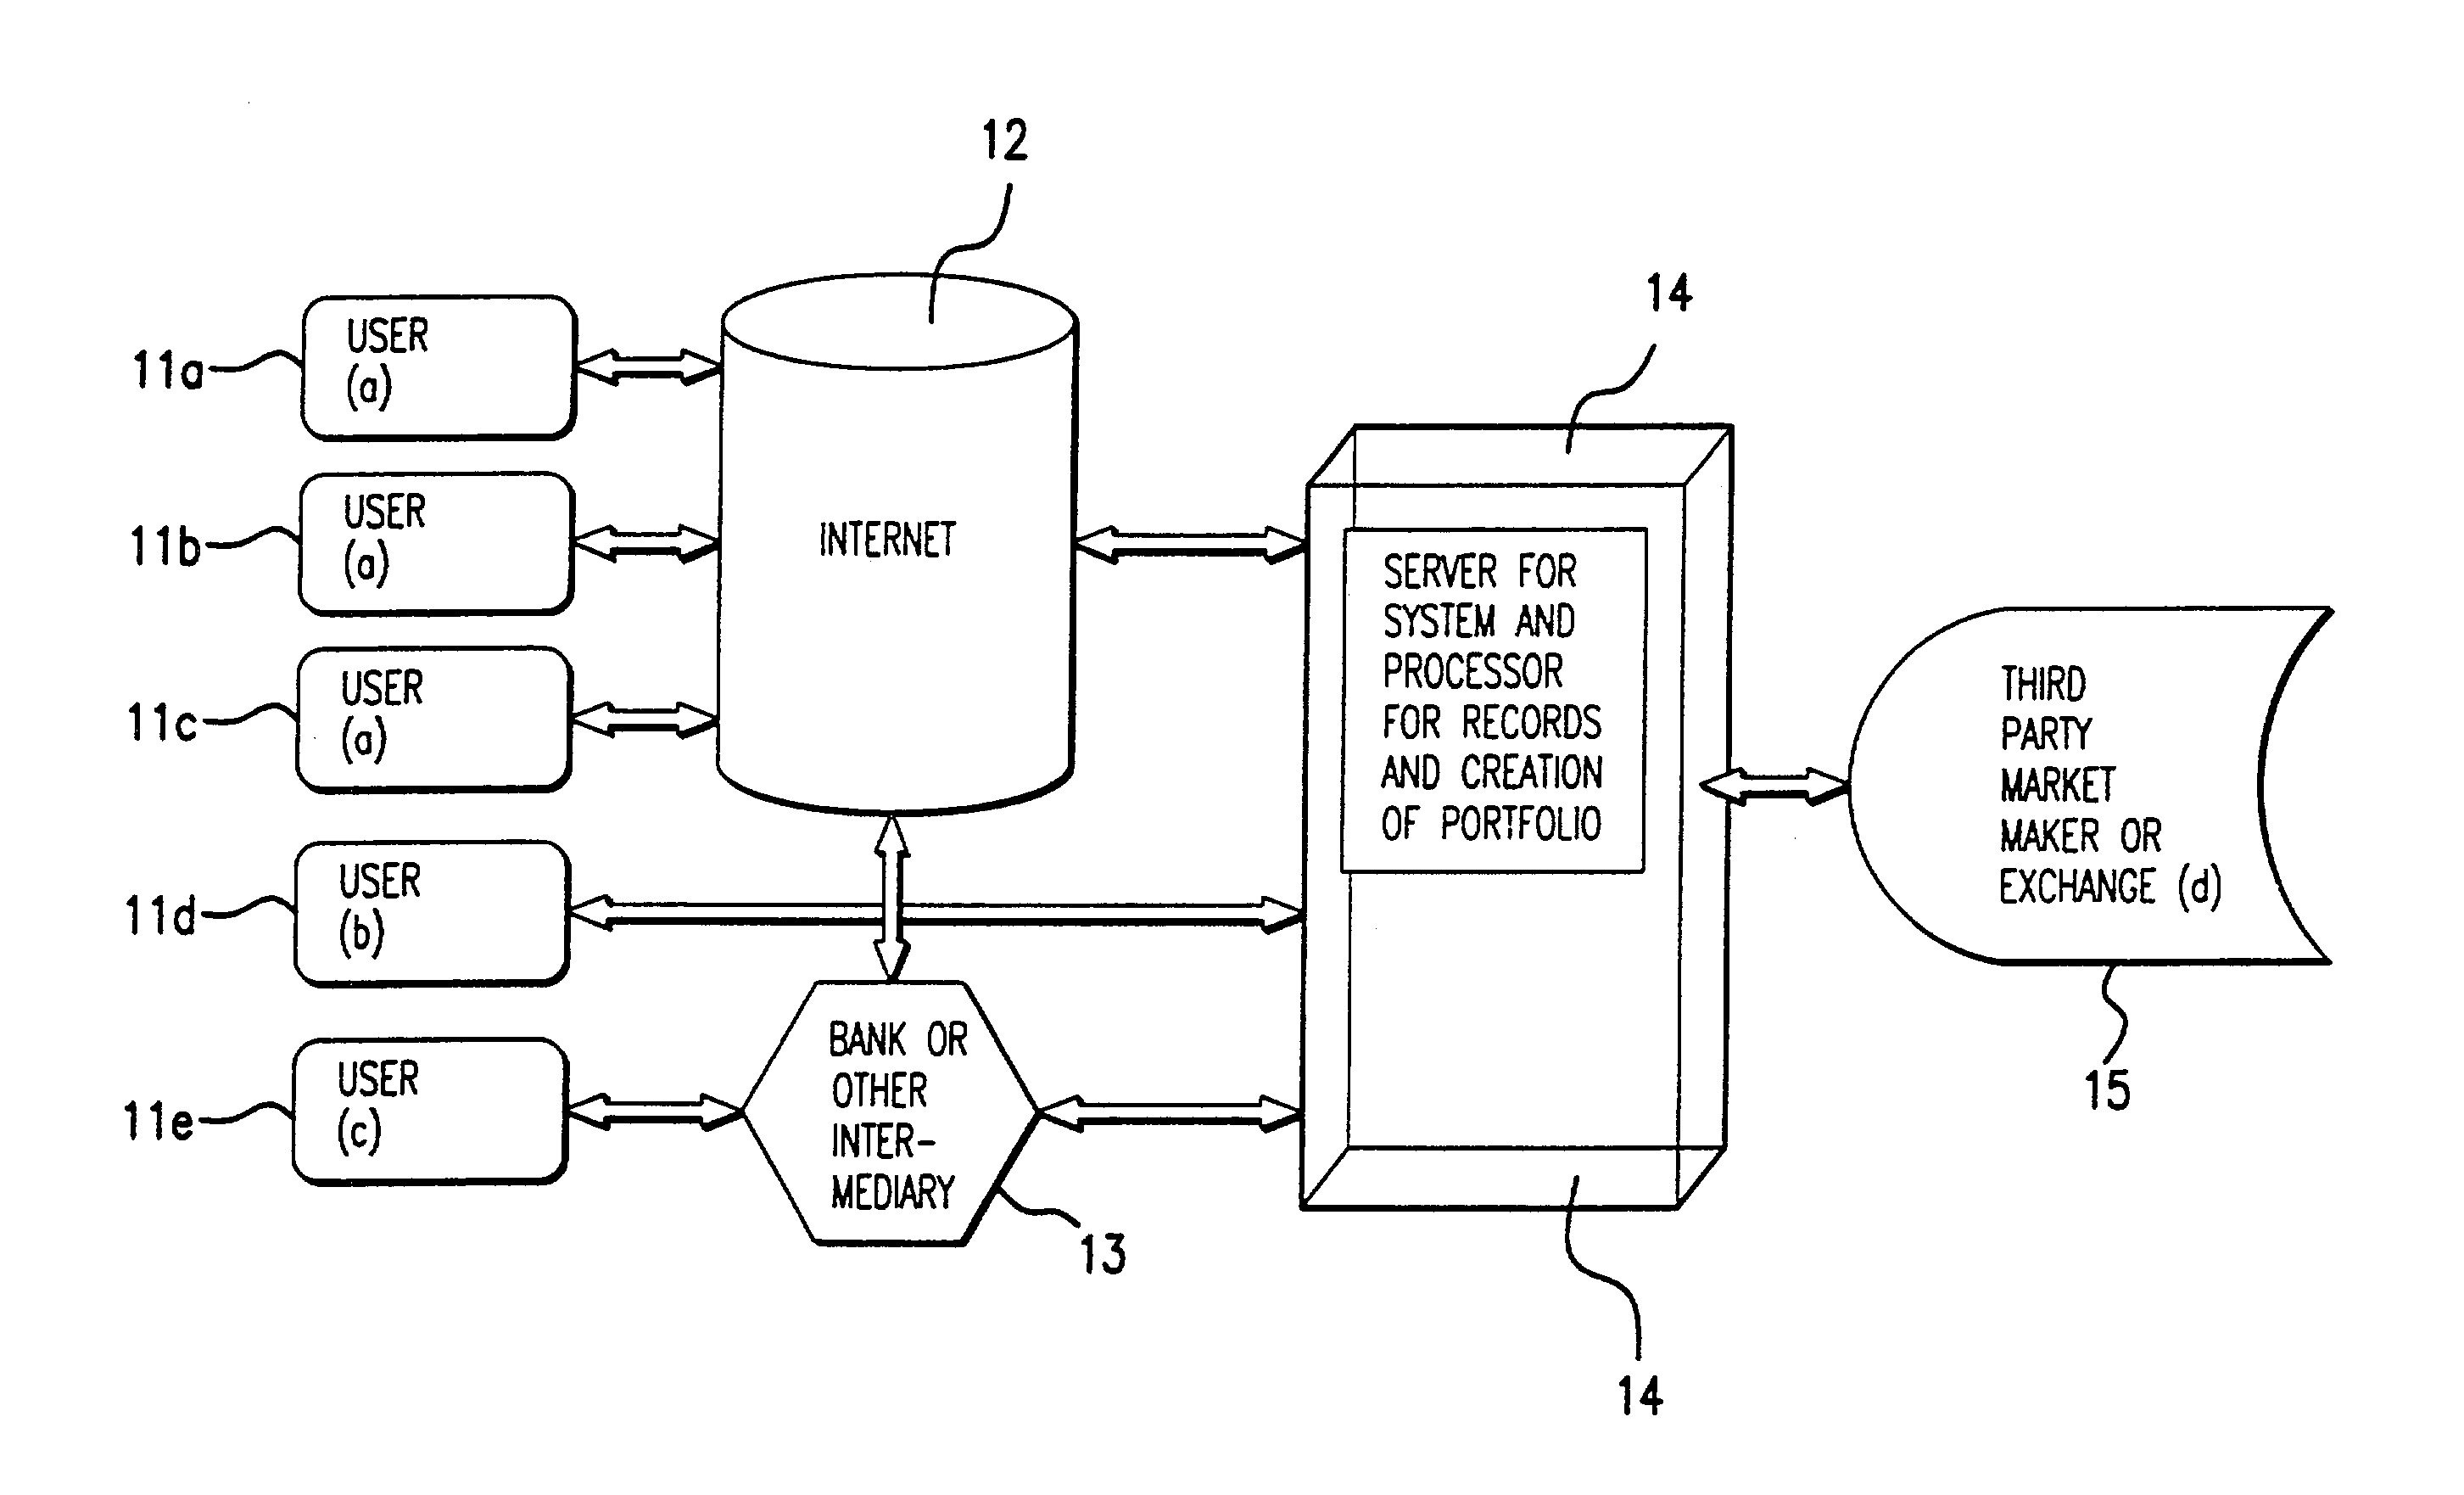 Method and apparatus for enabling individual or smaller investors or others to create and manage a portfolio of securities or other assets or liabilities on a cost effective basis